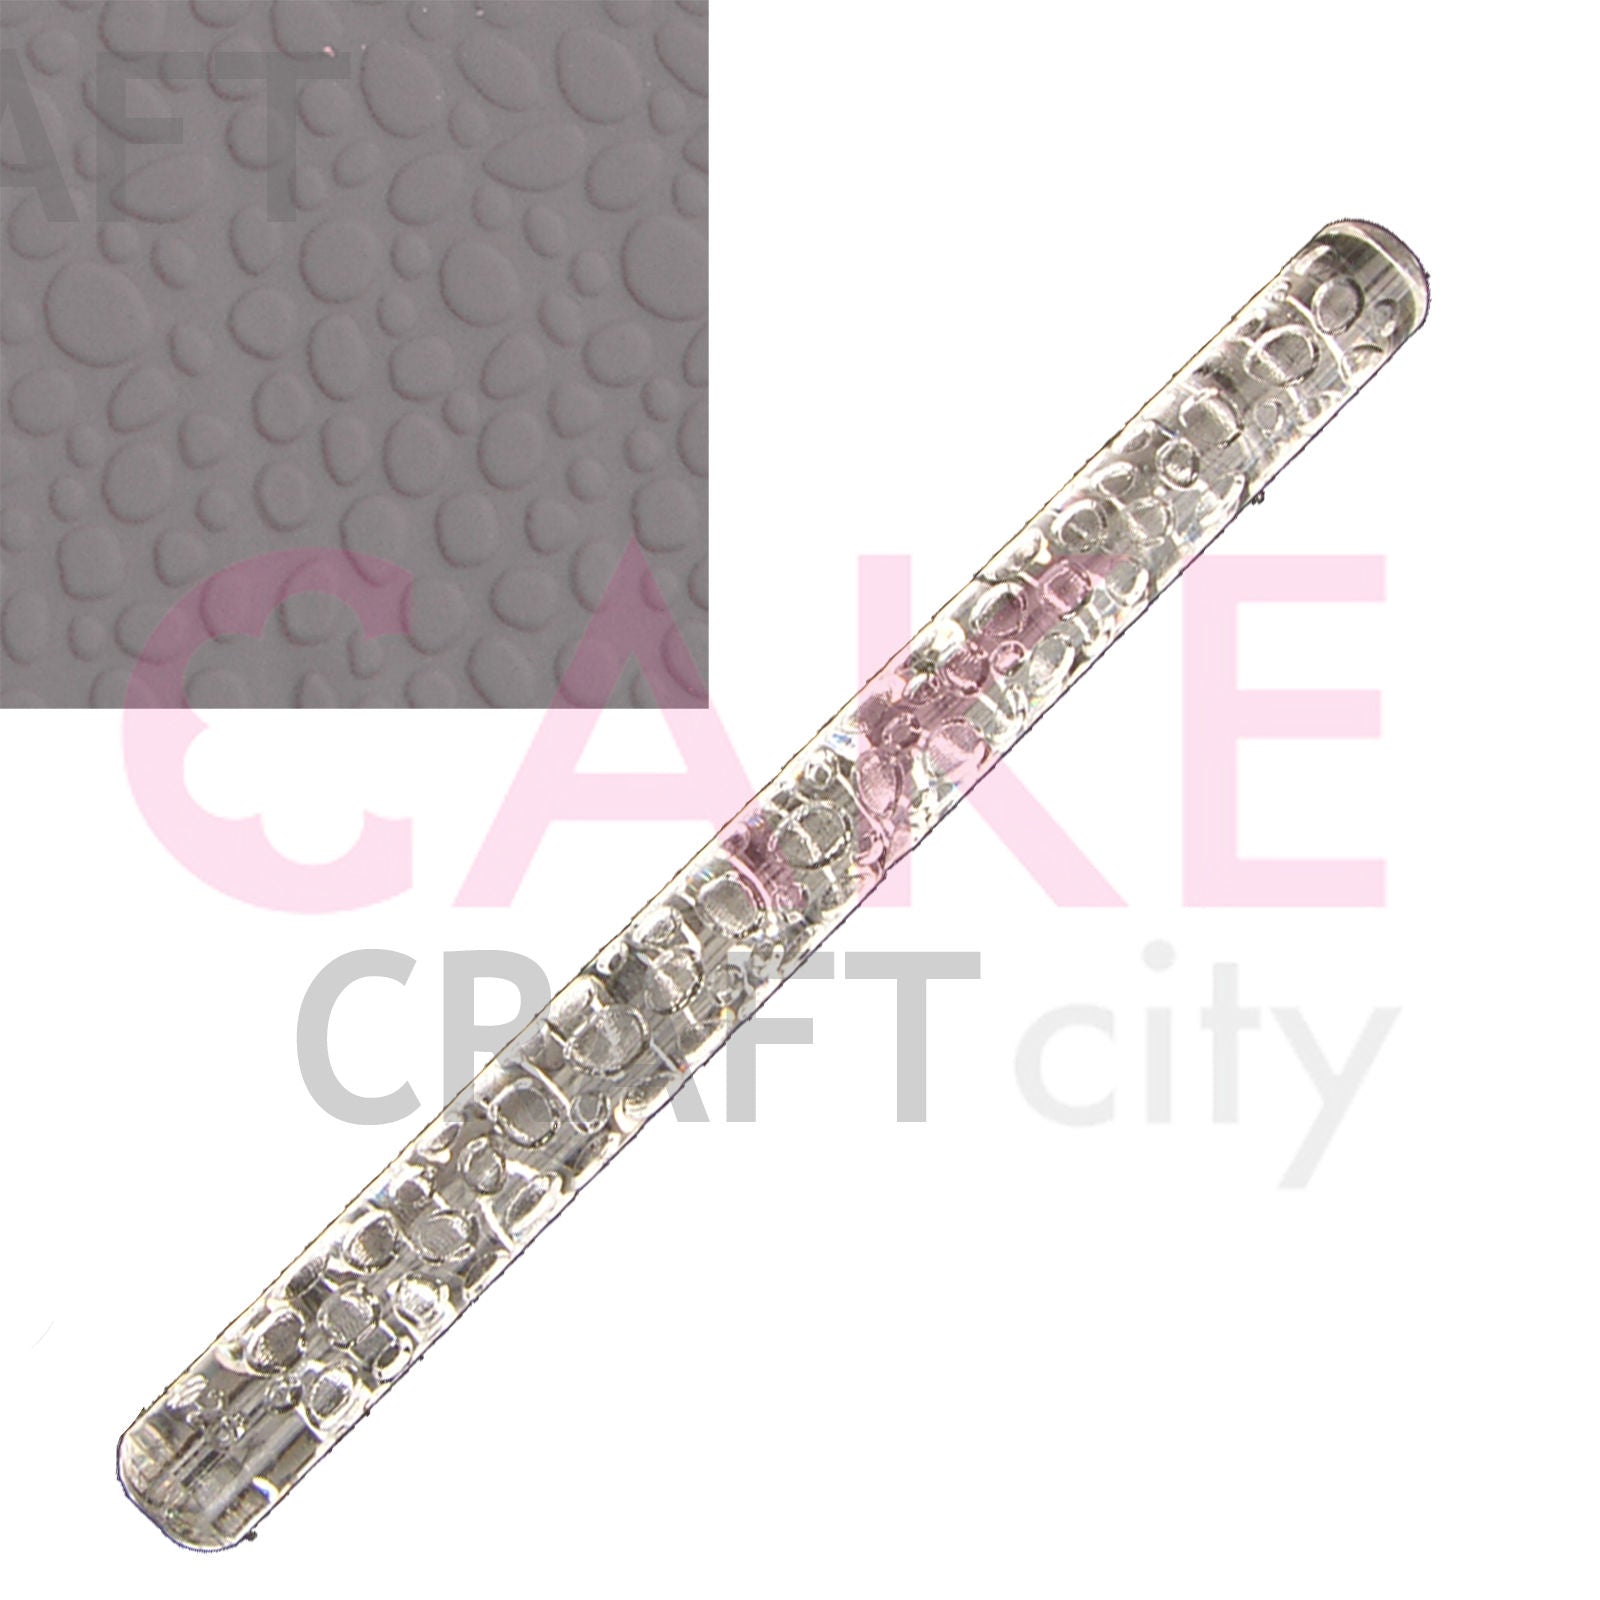 Large Cobblestone effect Texture Embossing Acrylic Cake Decorating Rolling Pin